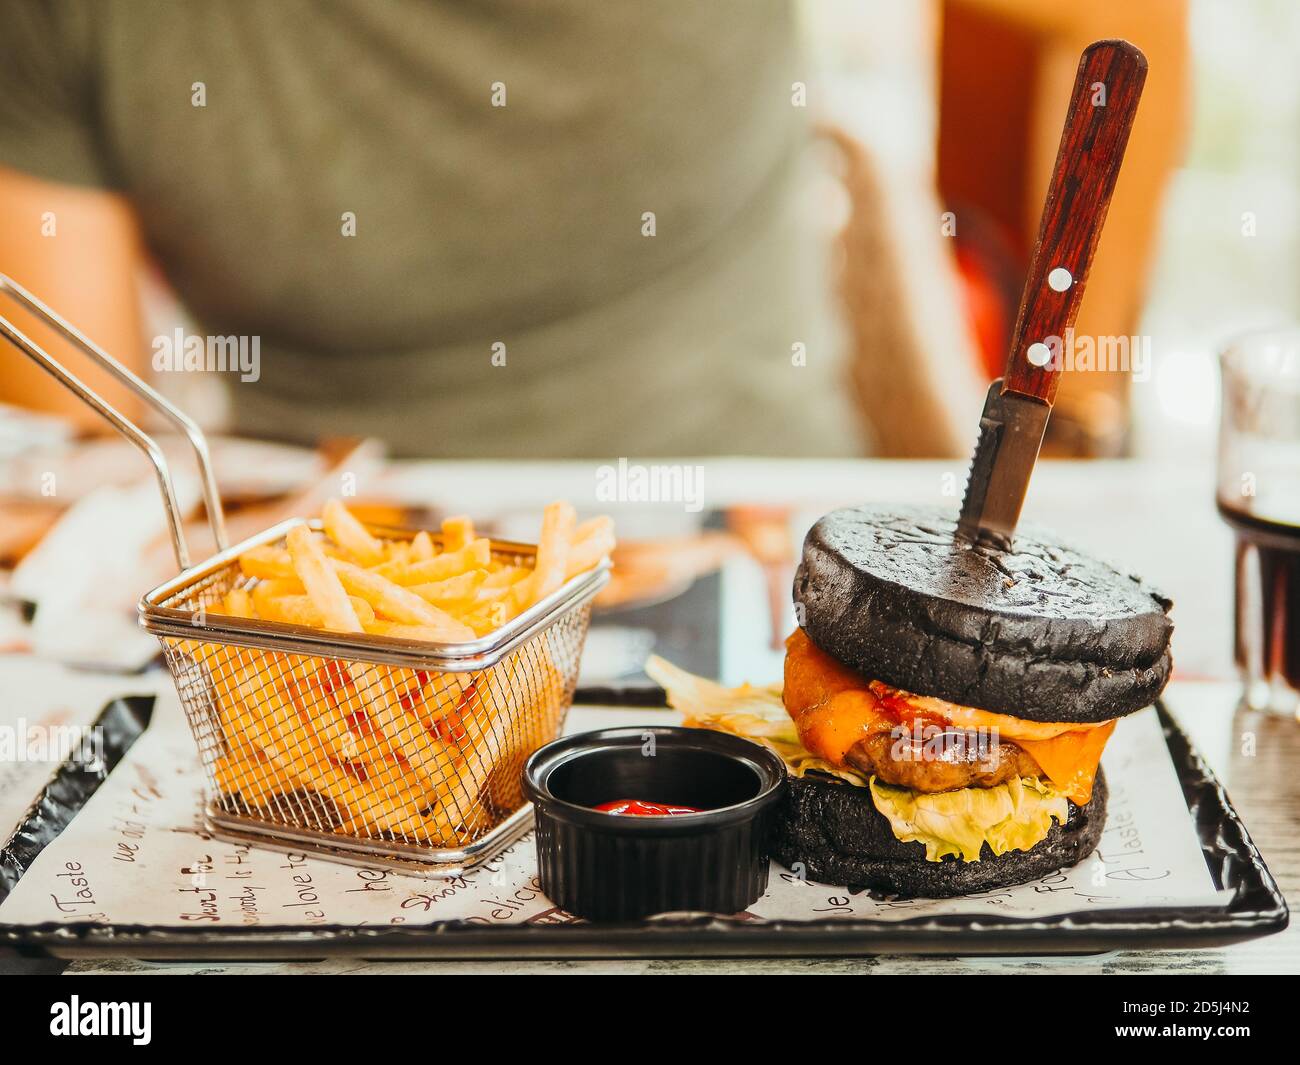 Unhealthy eating and fast food concept. Junk food, black burger and french fried potatoes in front of man silhouette on a table in a restaurant. View Stock Photo